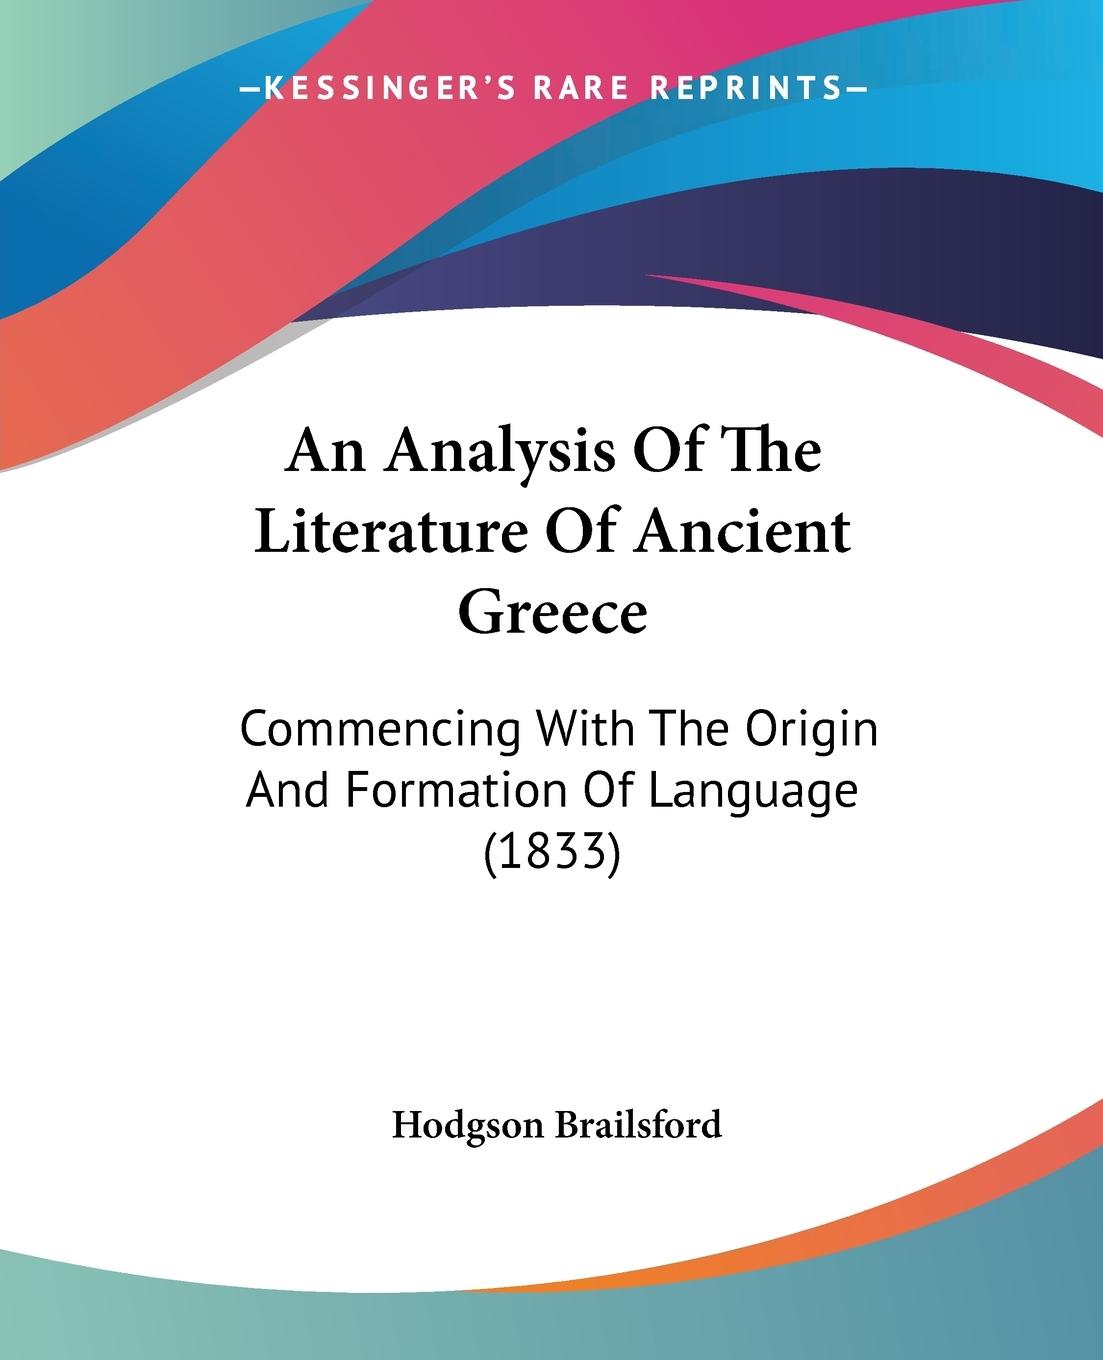 An Analysis Of The Literature Of Ancient Greece - Brailsford, Hodgson